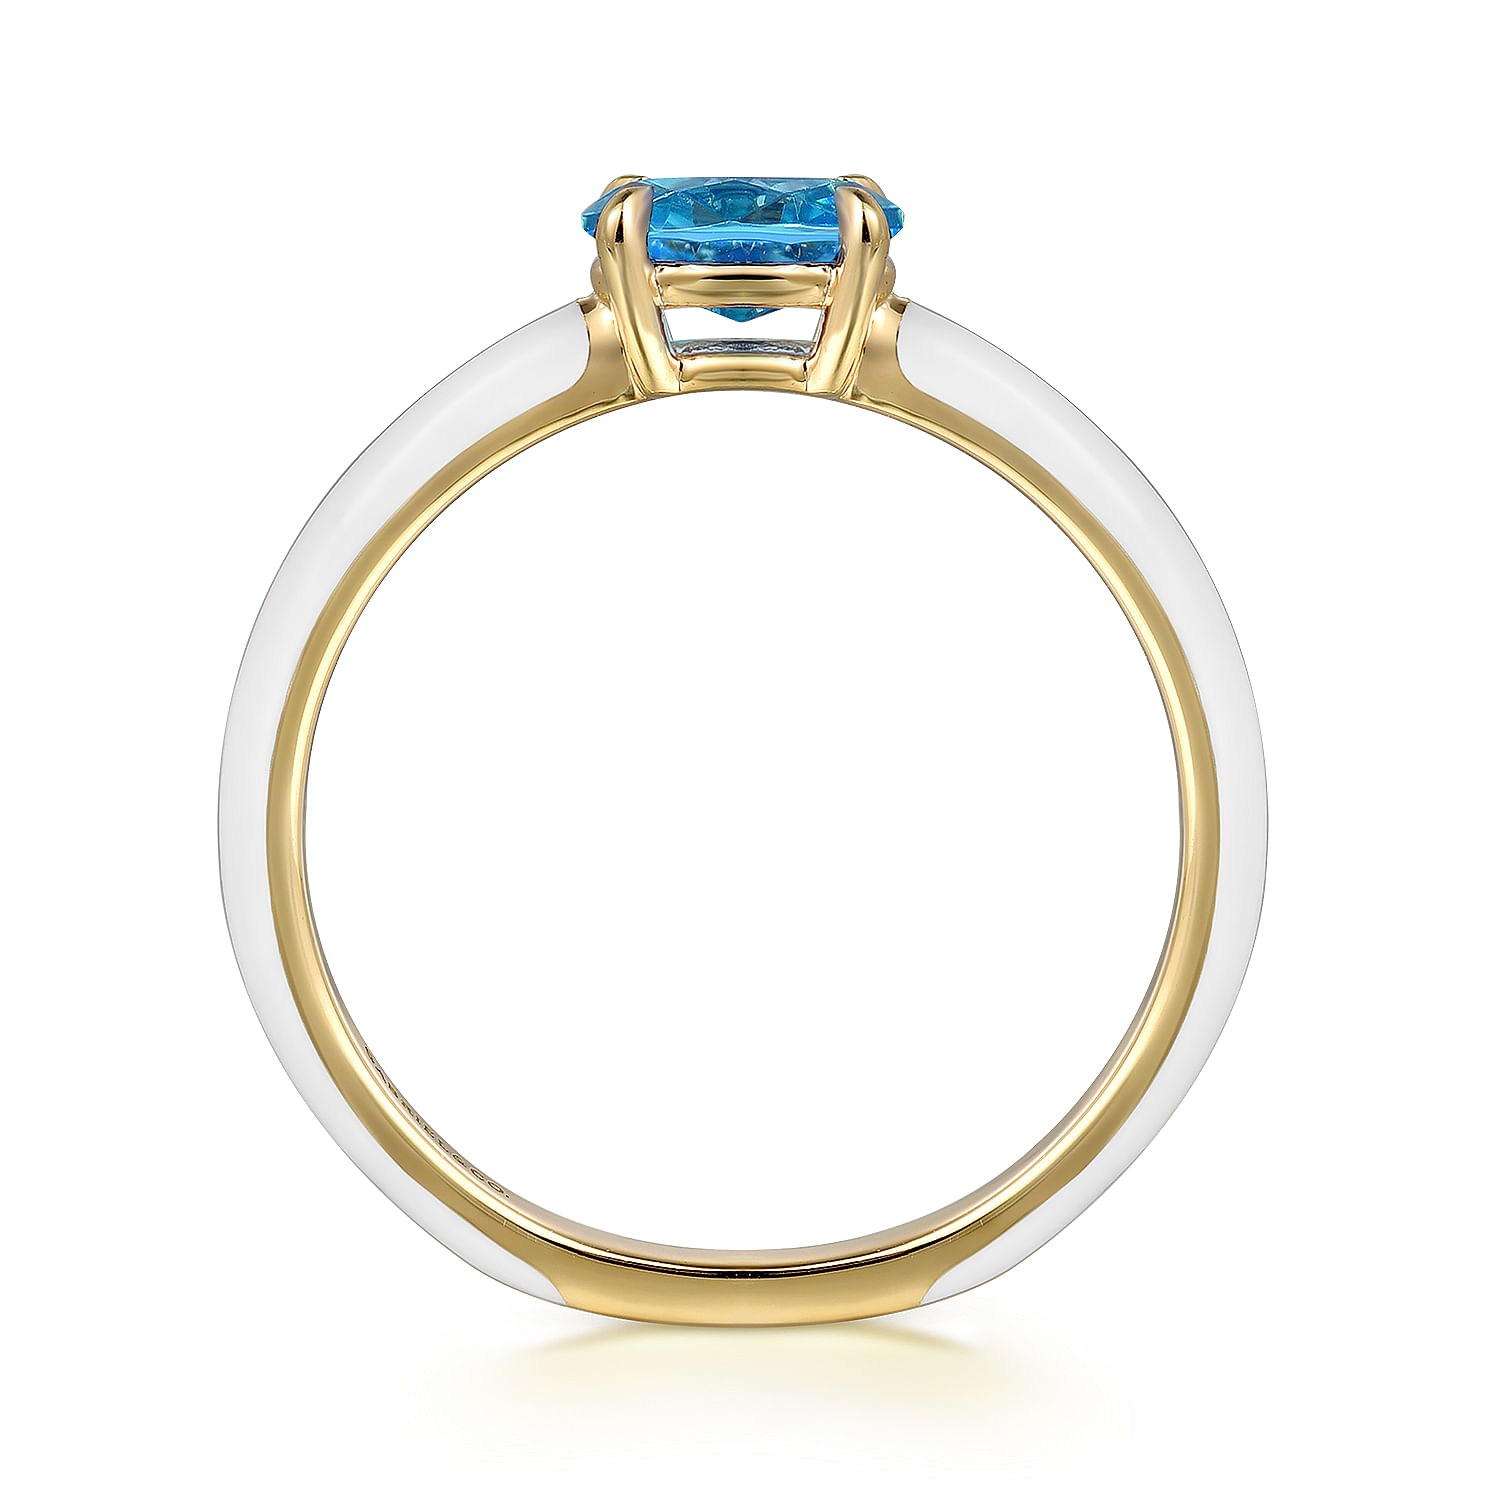 14K Yellow Gold Blue Topaz Stackable Ring with White Enamel